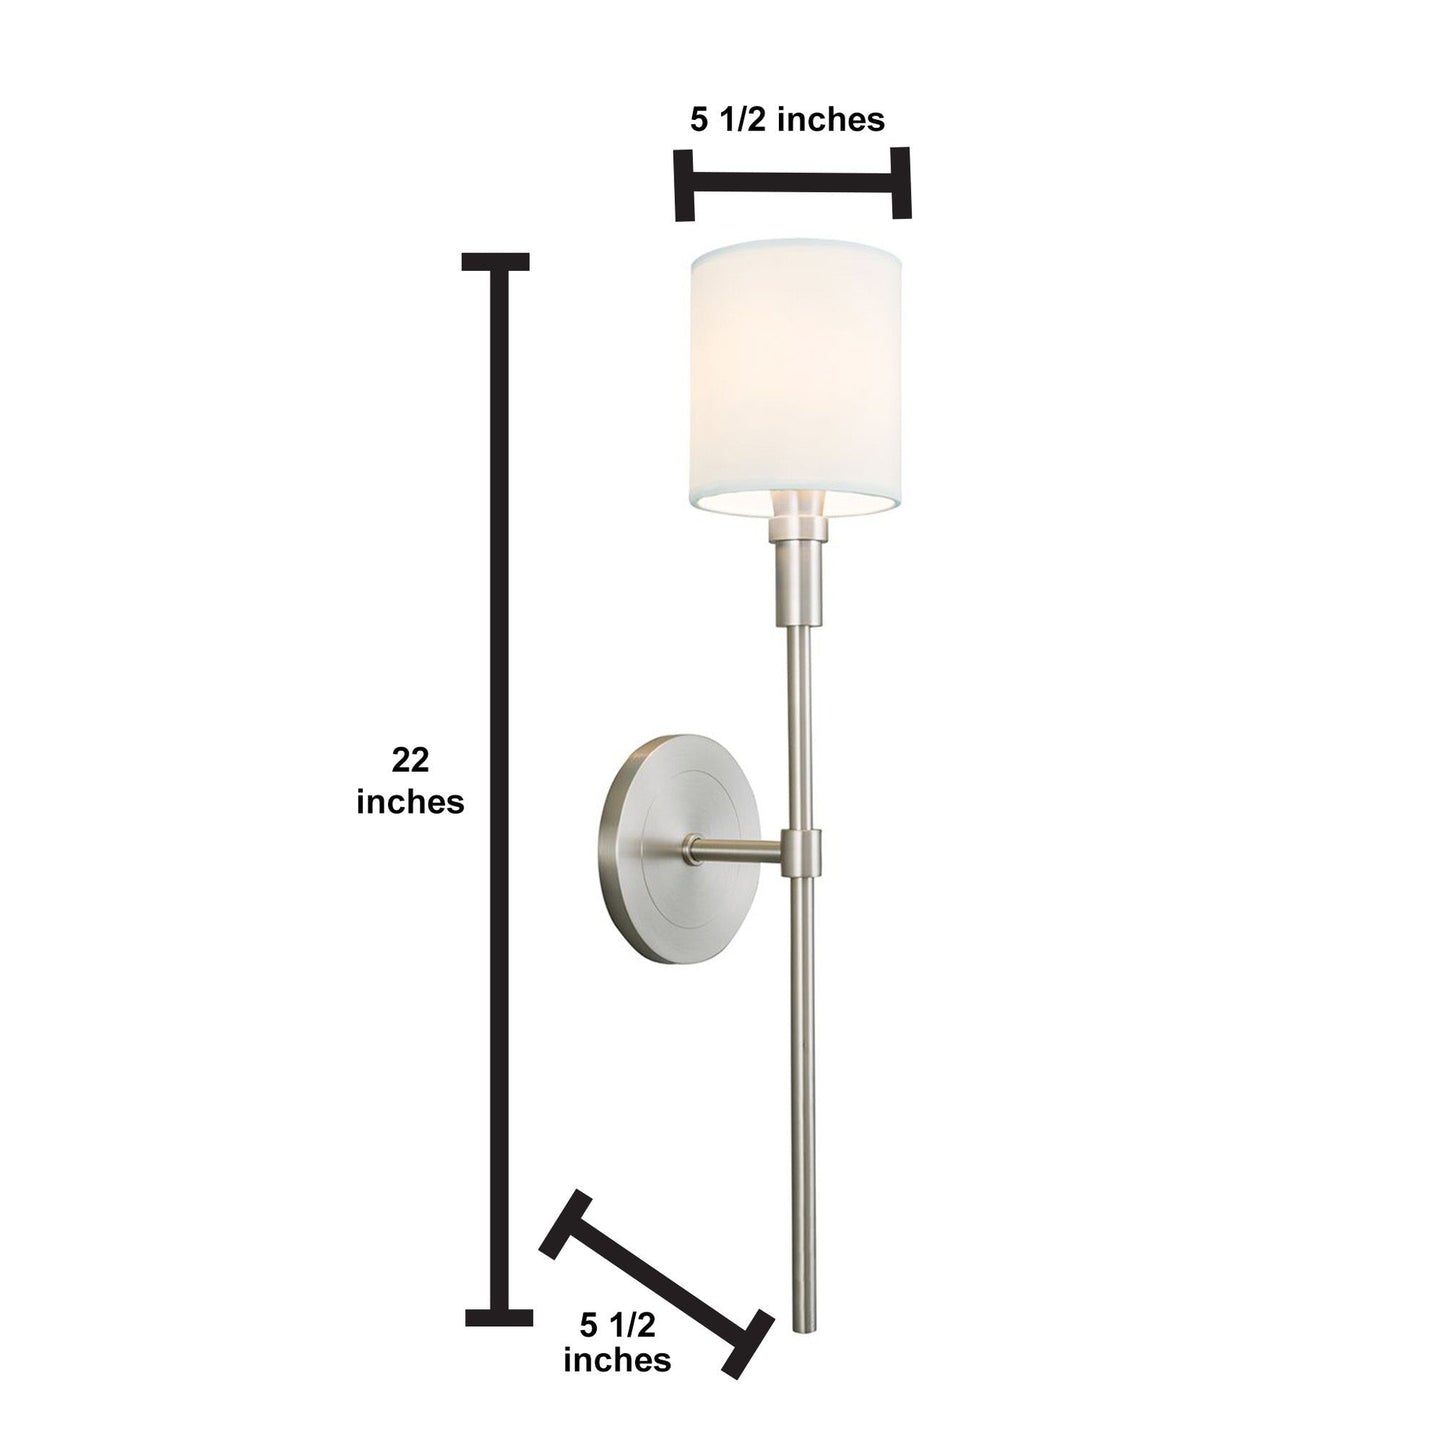 Norwell Lighting Zavier 22" x 5" 1-Light Candlestick Sconce Polished Nickel Indoor Wall Light With Fabric Diffuser